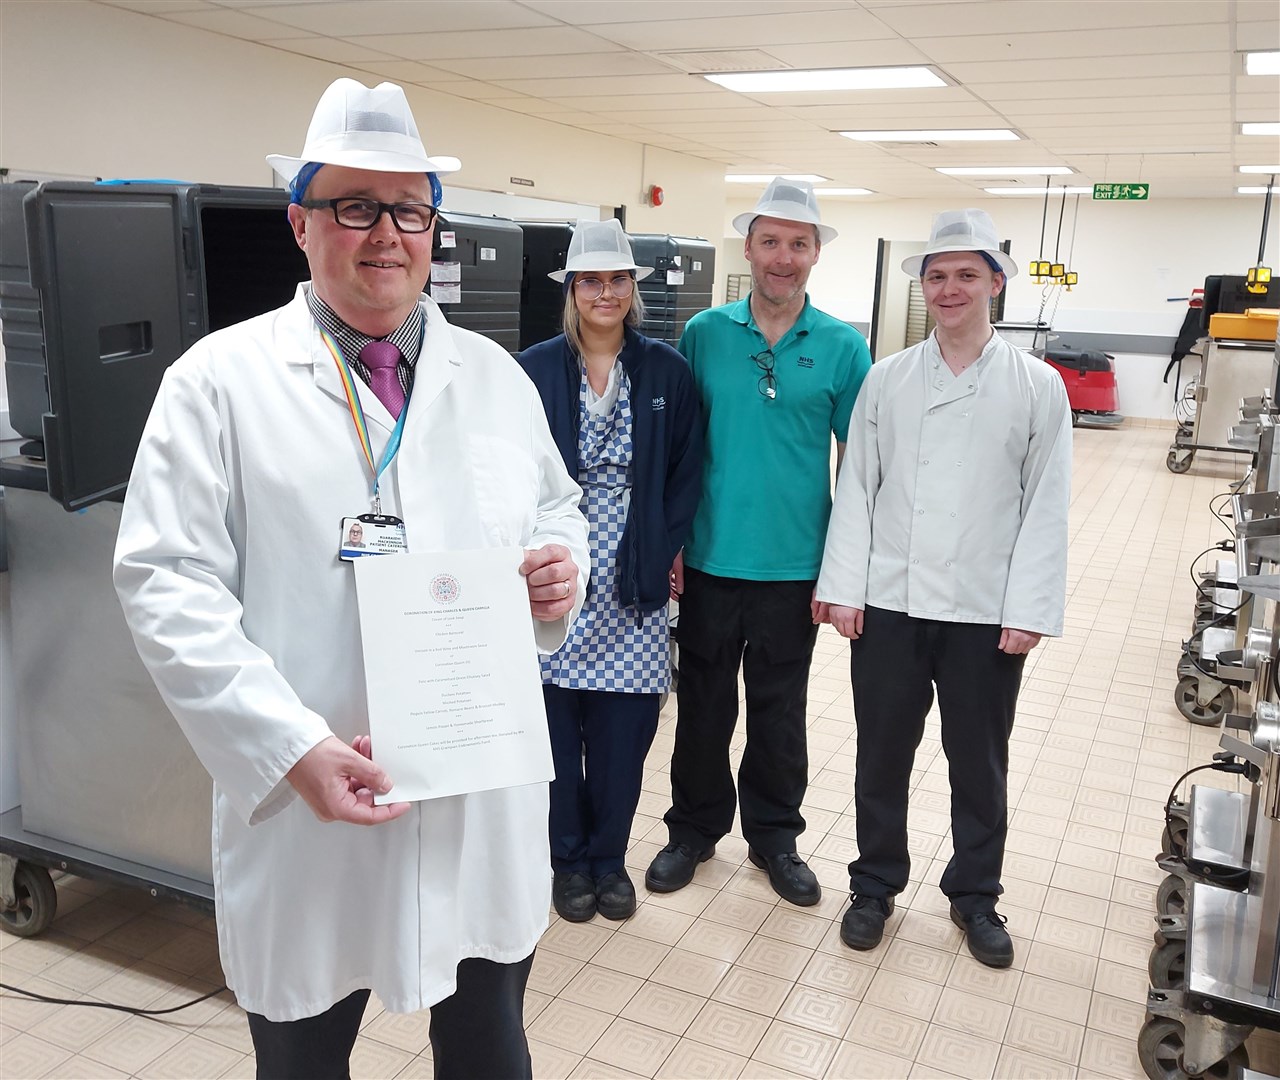 (Left to right) Ruaraidh McKinnon, Caitlin Angus (cook), Steven Tait (team leader), and Bradley Gillespie (cook) in the production kitchen at Royal Cornhill Hospital.